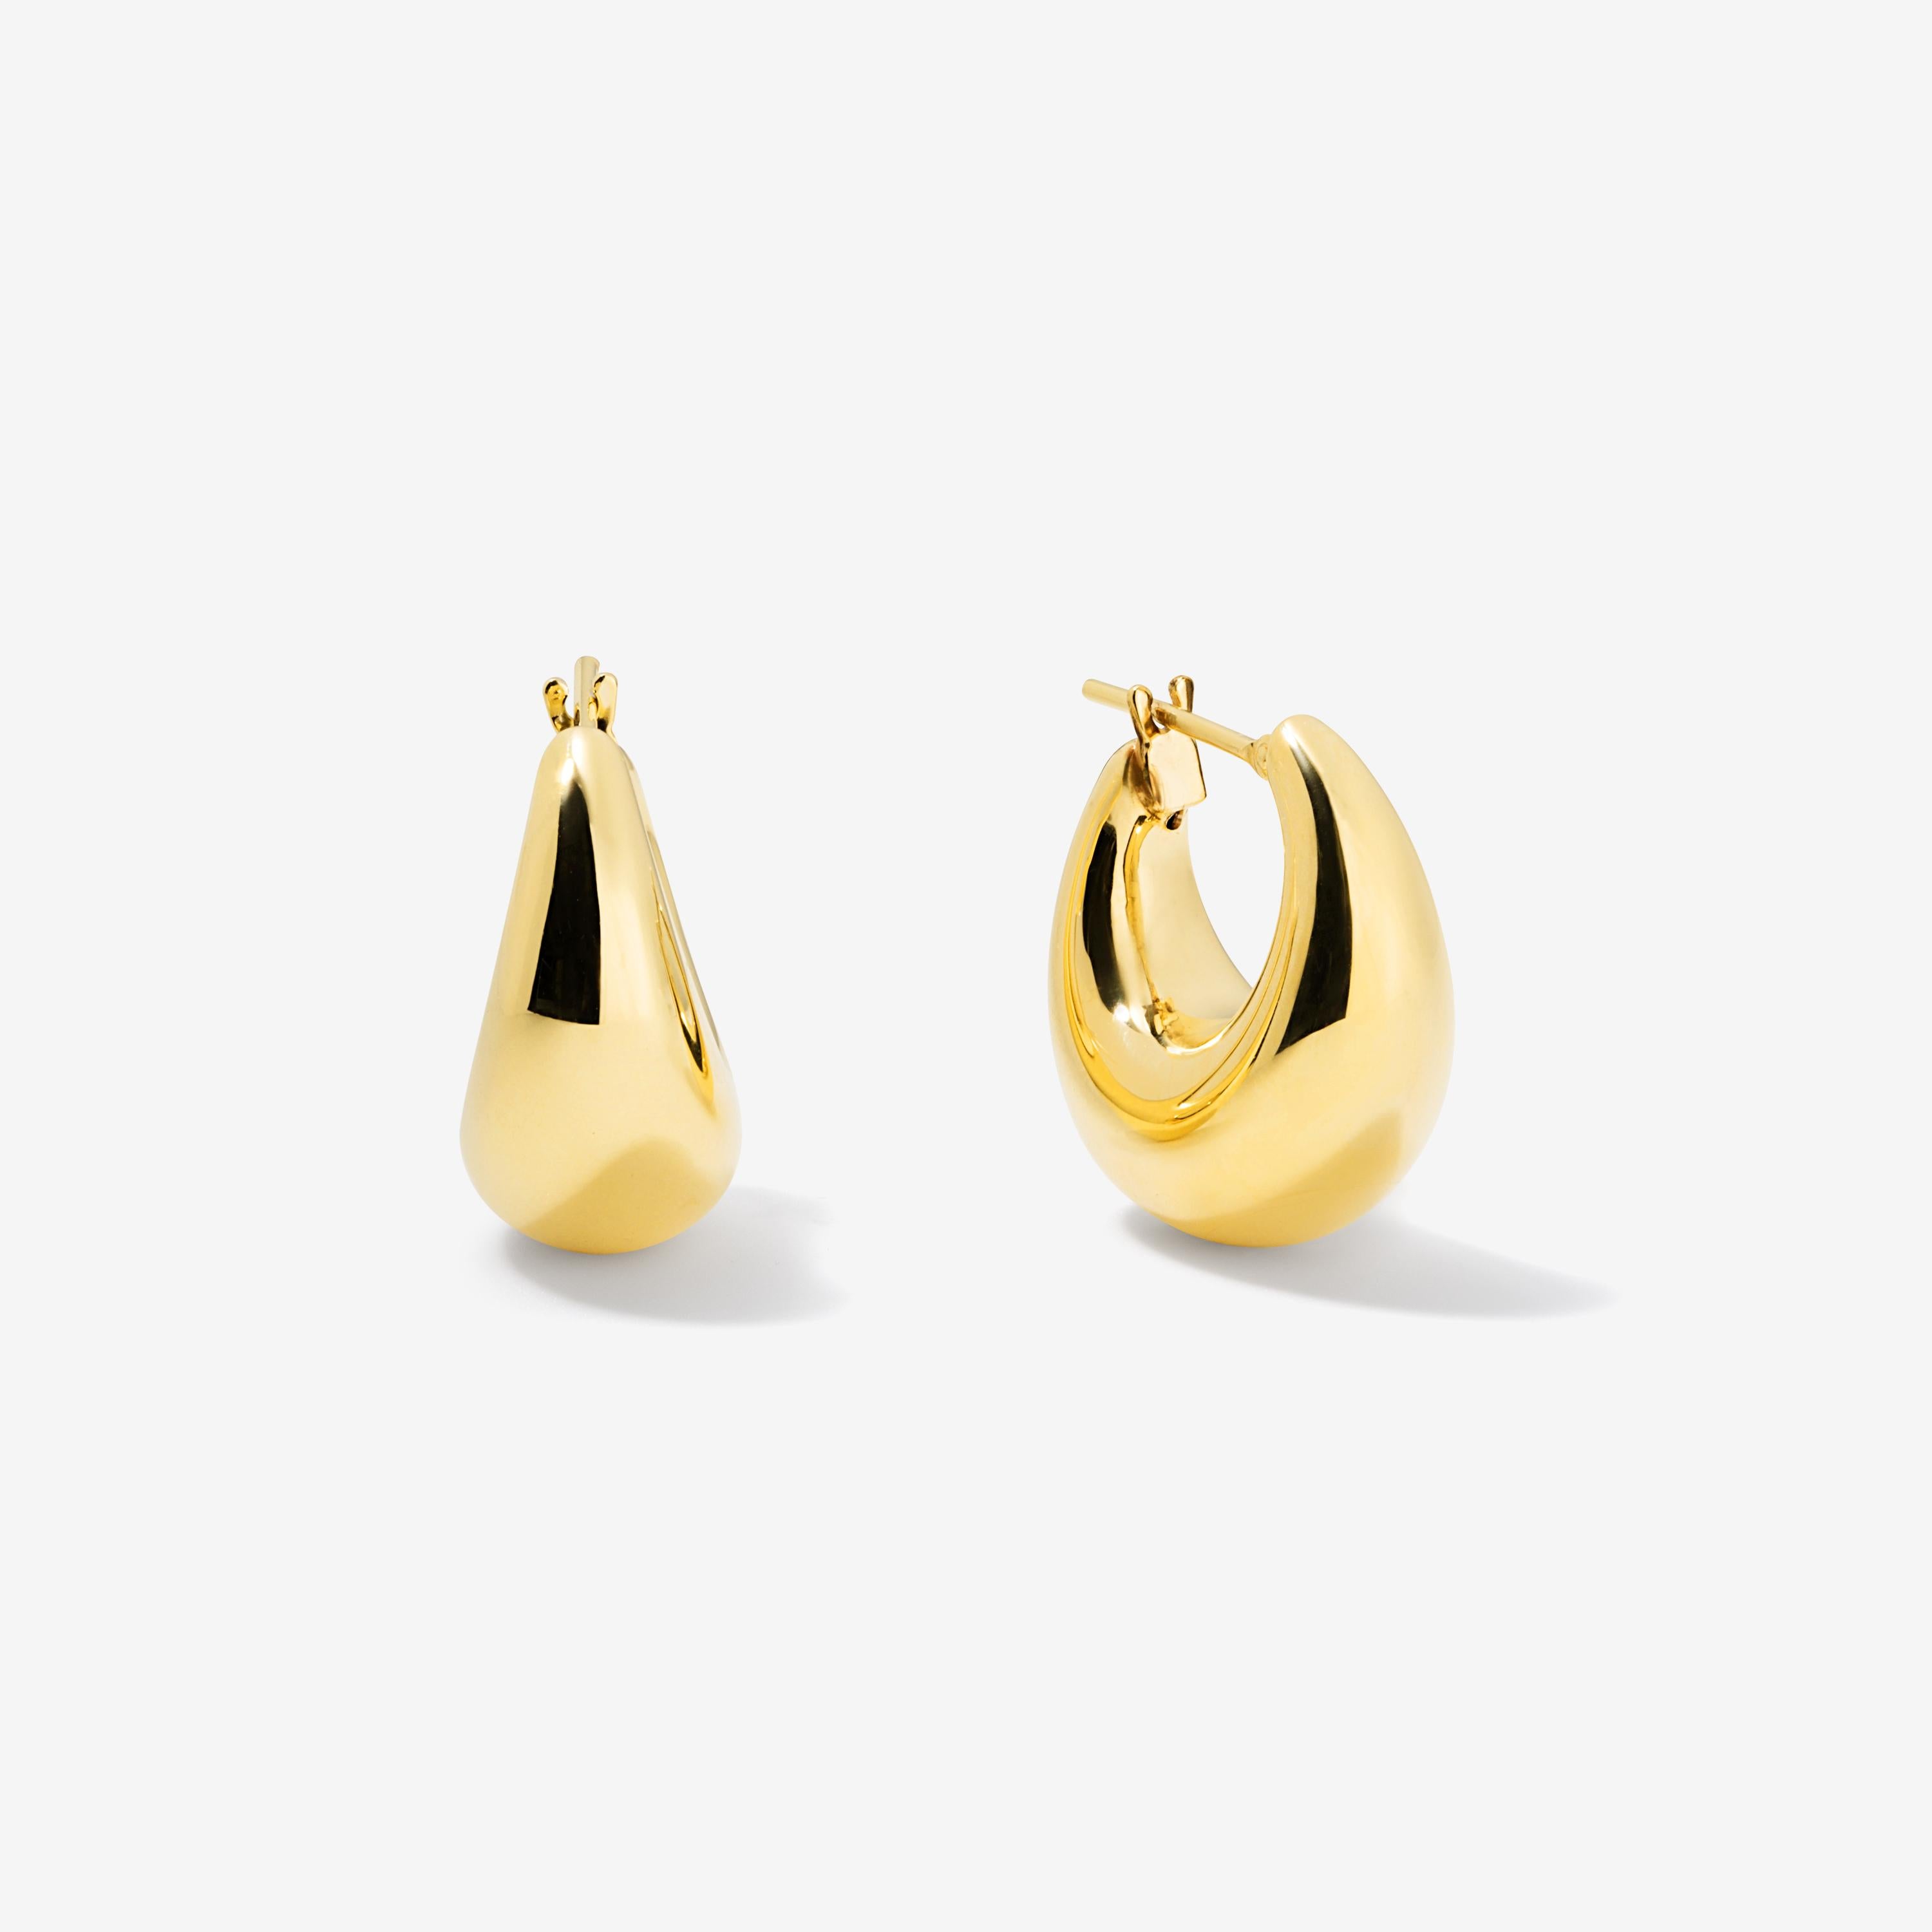 Our electroform hoops collection is designed to keep you on trend without weighing you down.

Made of 14k yellow gold, and sturdy enough to withstand everyday wear.

Small: 20mm, approximately 4.3 grams per pair
Medium: 25mm, approximately 5.6 grams